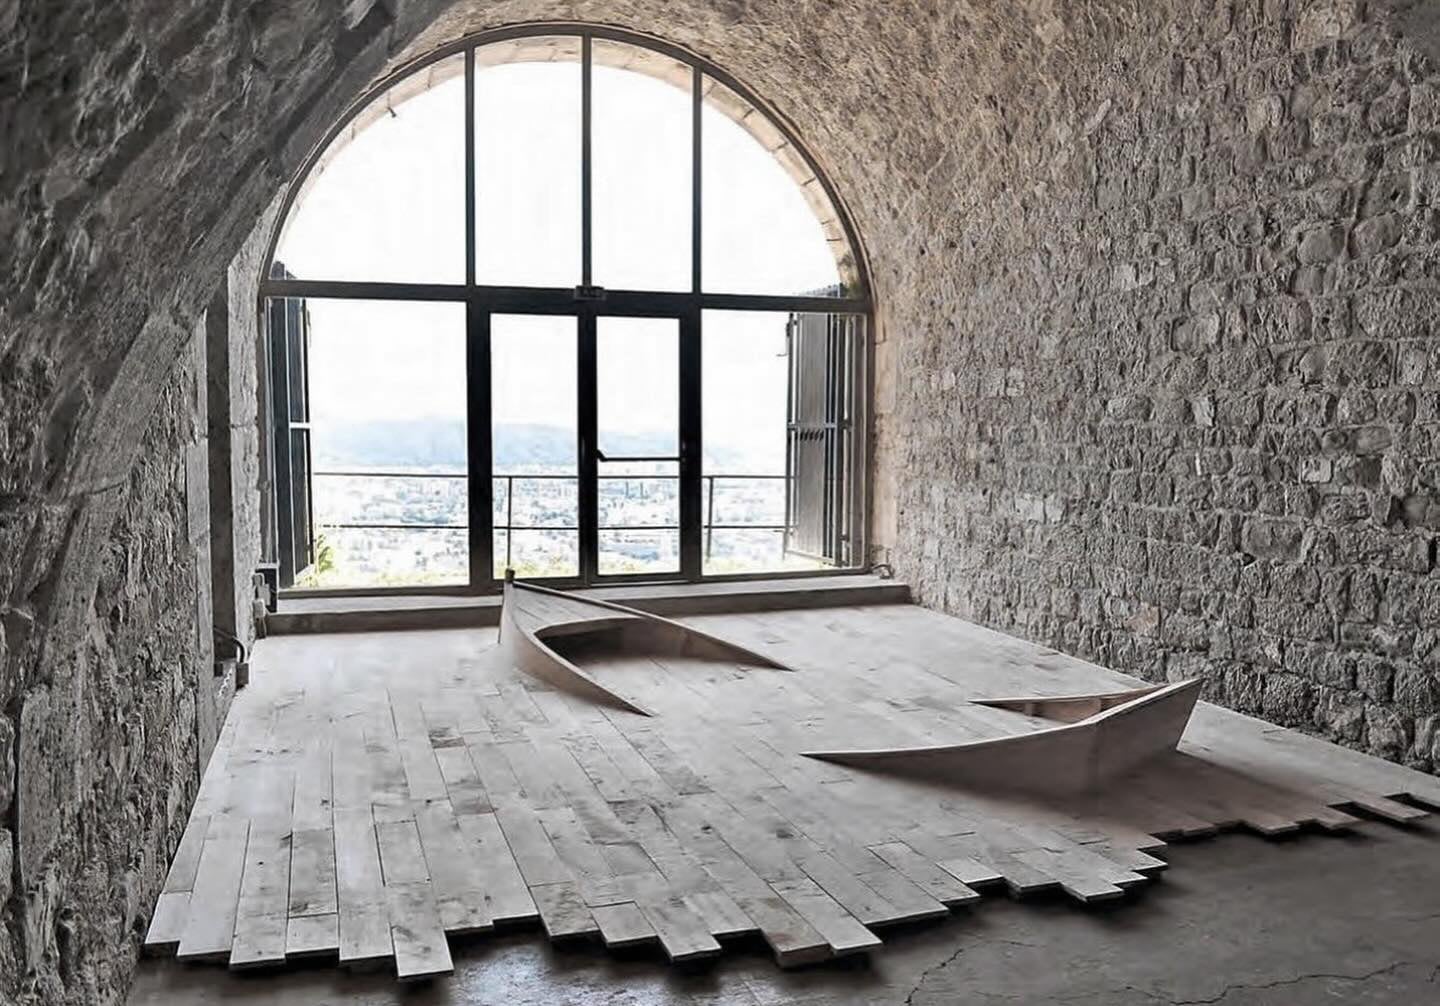 the edges of a small boat emerge from a wooden floor installation in a brick cavern